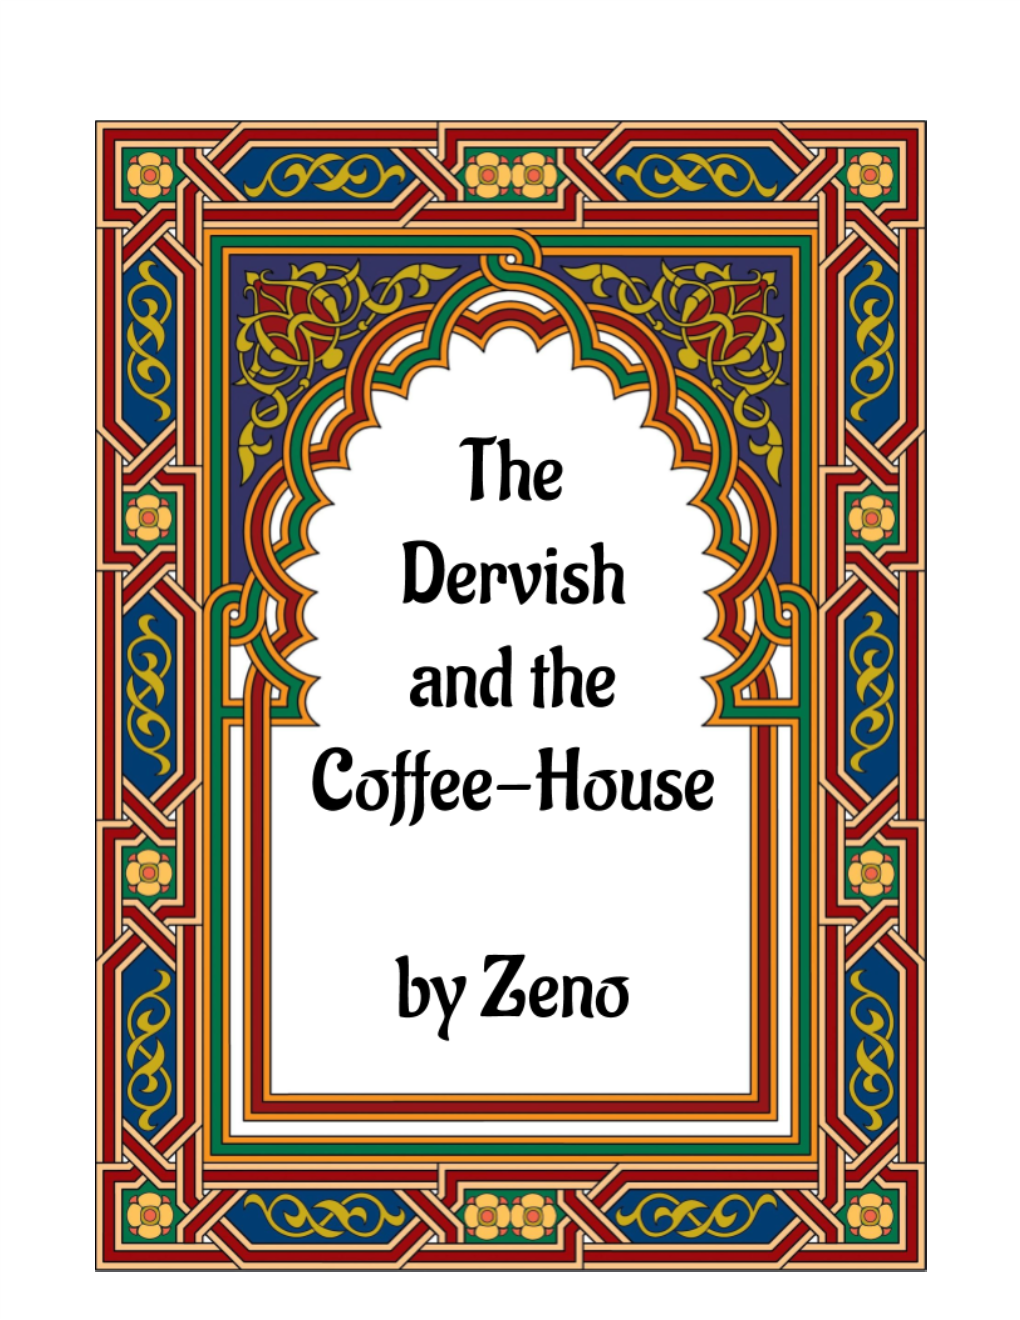 The Coffee-House in the Following Story, Lives in a Far Away Town, in Times Long Forgotten